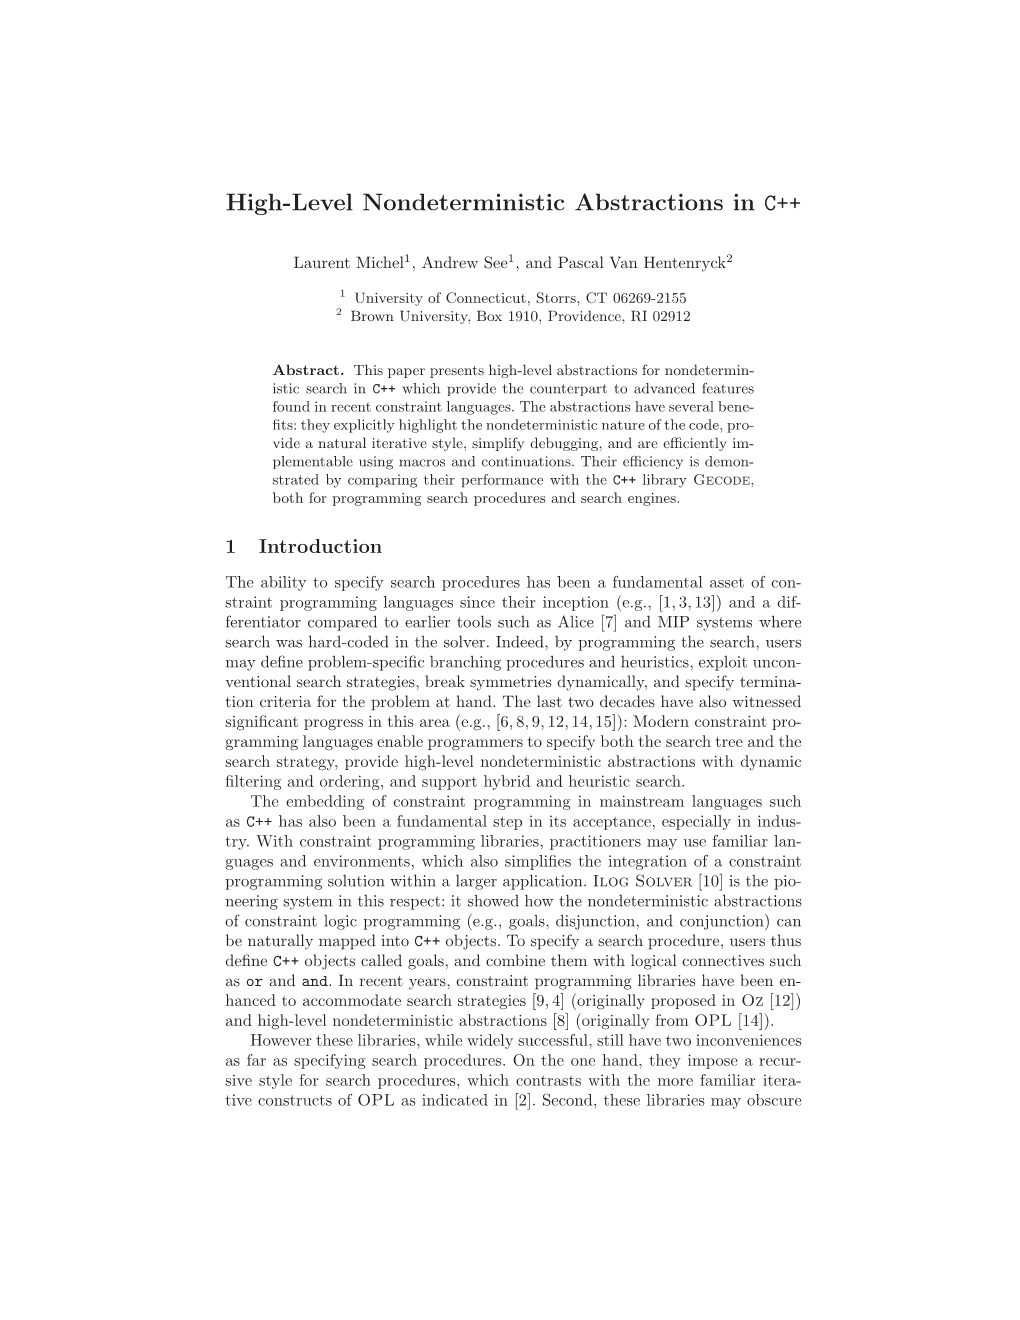 High-Level Nondeterministic Abstractions in C++